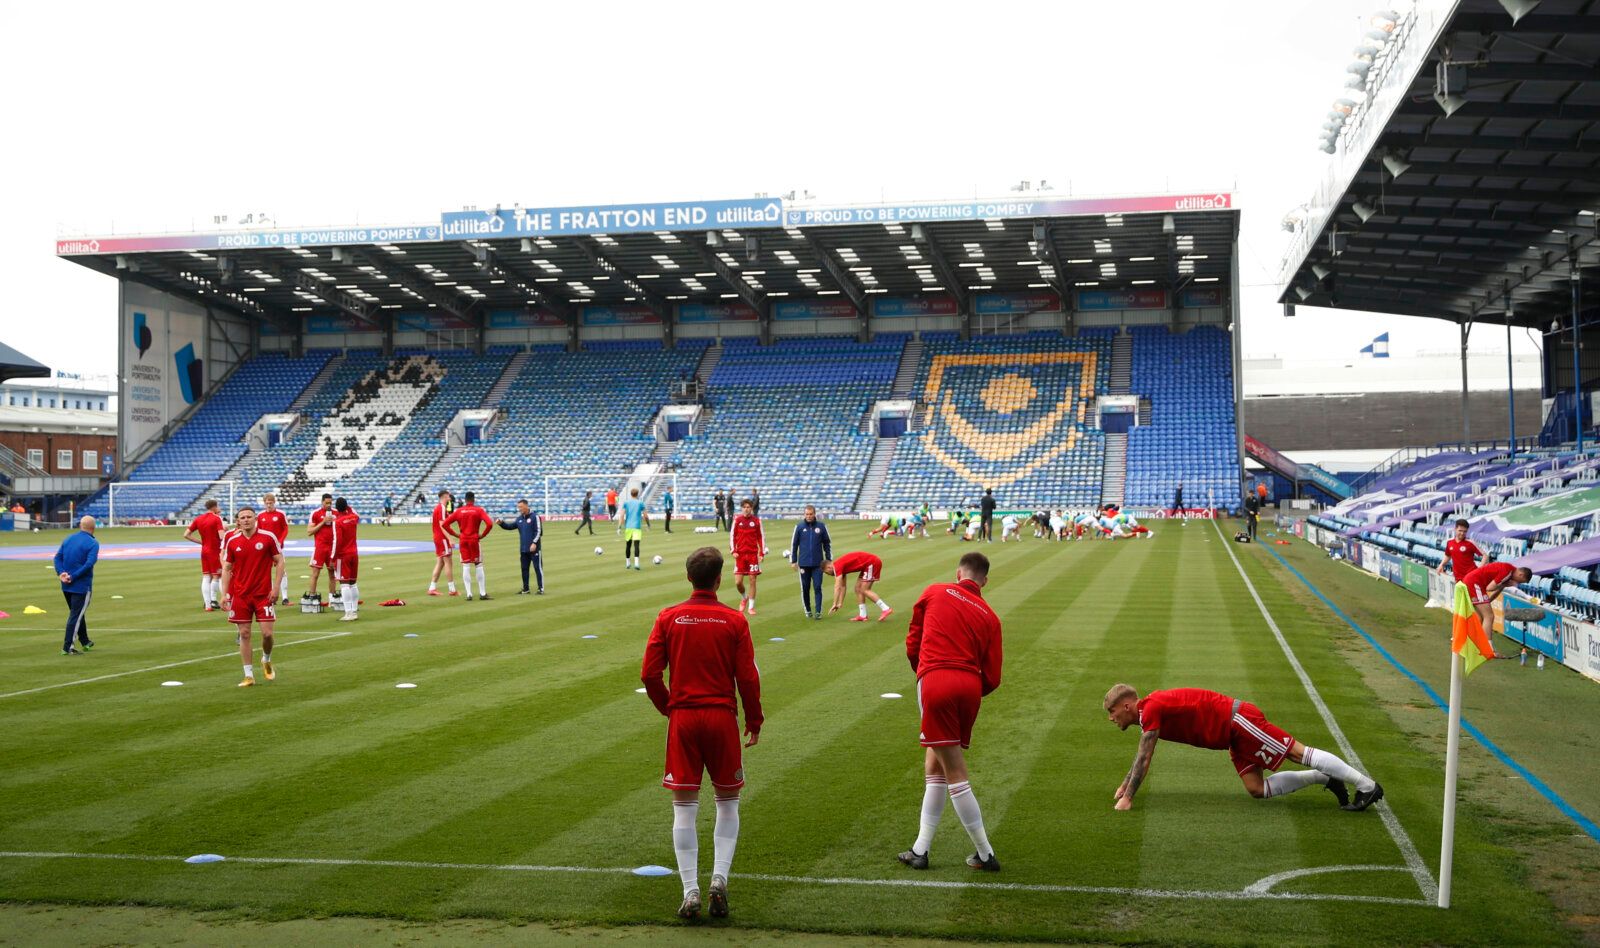 Soccer Football - League One - Portsmouth v Accrington Stanley - Fratton Park, Portsmouth, Britain - May 9, 2021 Accrington Stanley players during the warm up before the match Action Images/Andrew Boyers EDITORIAL USE ONLY. No use with unauthorized audio, video, data, fixture lists, club/league logos or 'live' services. Online in-match use limited to 75 images, no video emulation. No use in betting, games or single club /league/player publications.  Please contact your account representative for